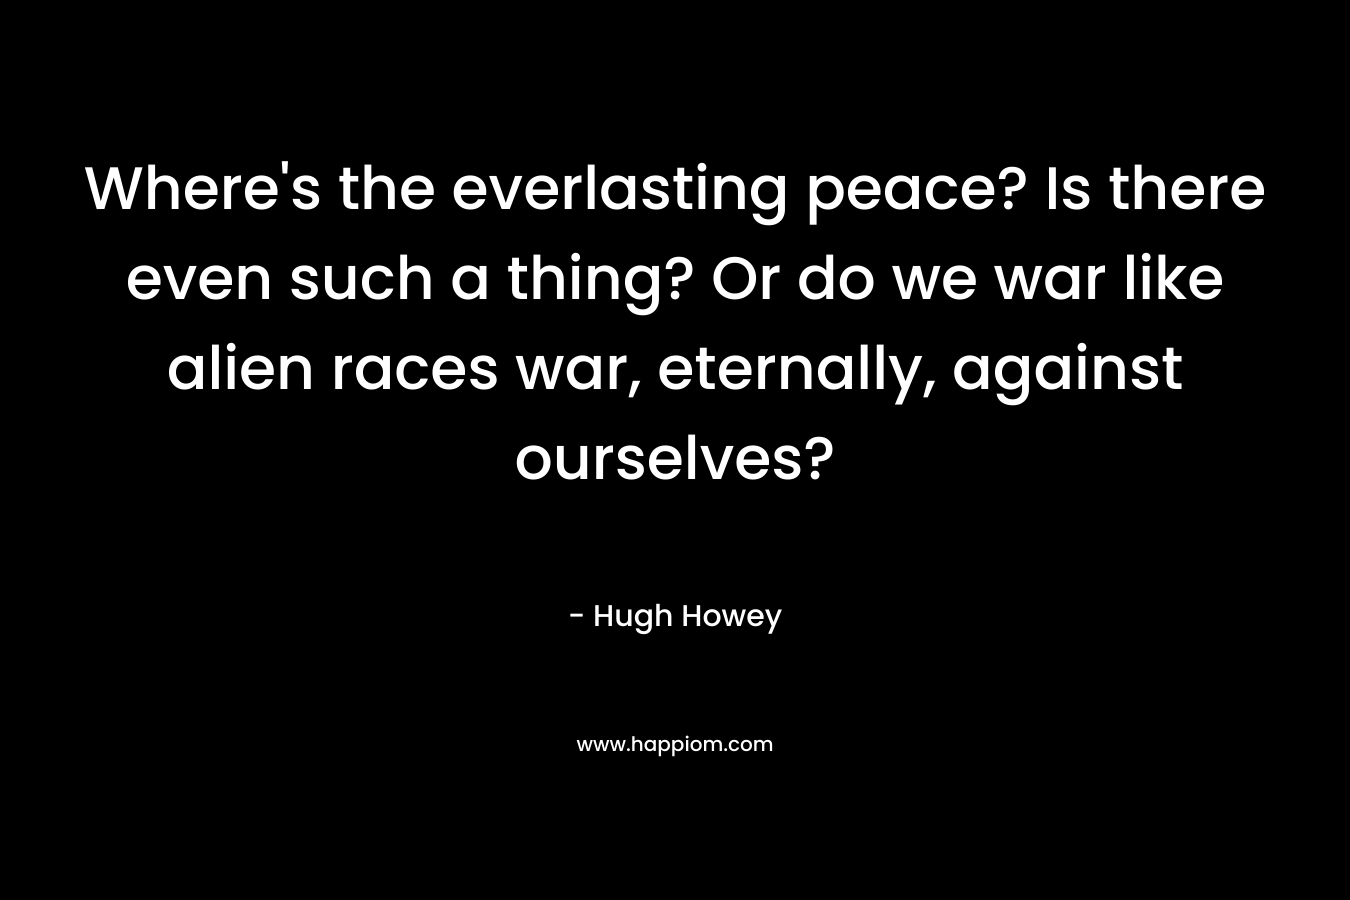 Where’s the everlasting peace? Is there even such a thing? Or do we war like alien races war, eternally, against ourselves? – Hugh Howey